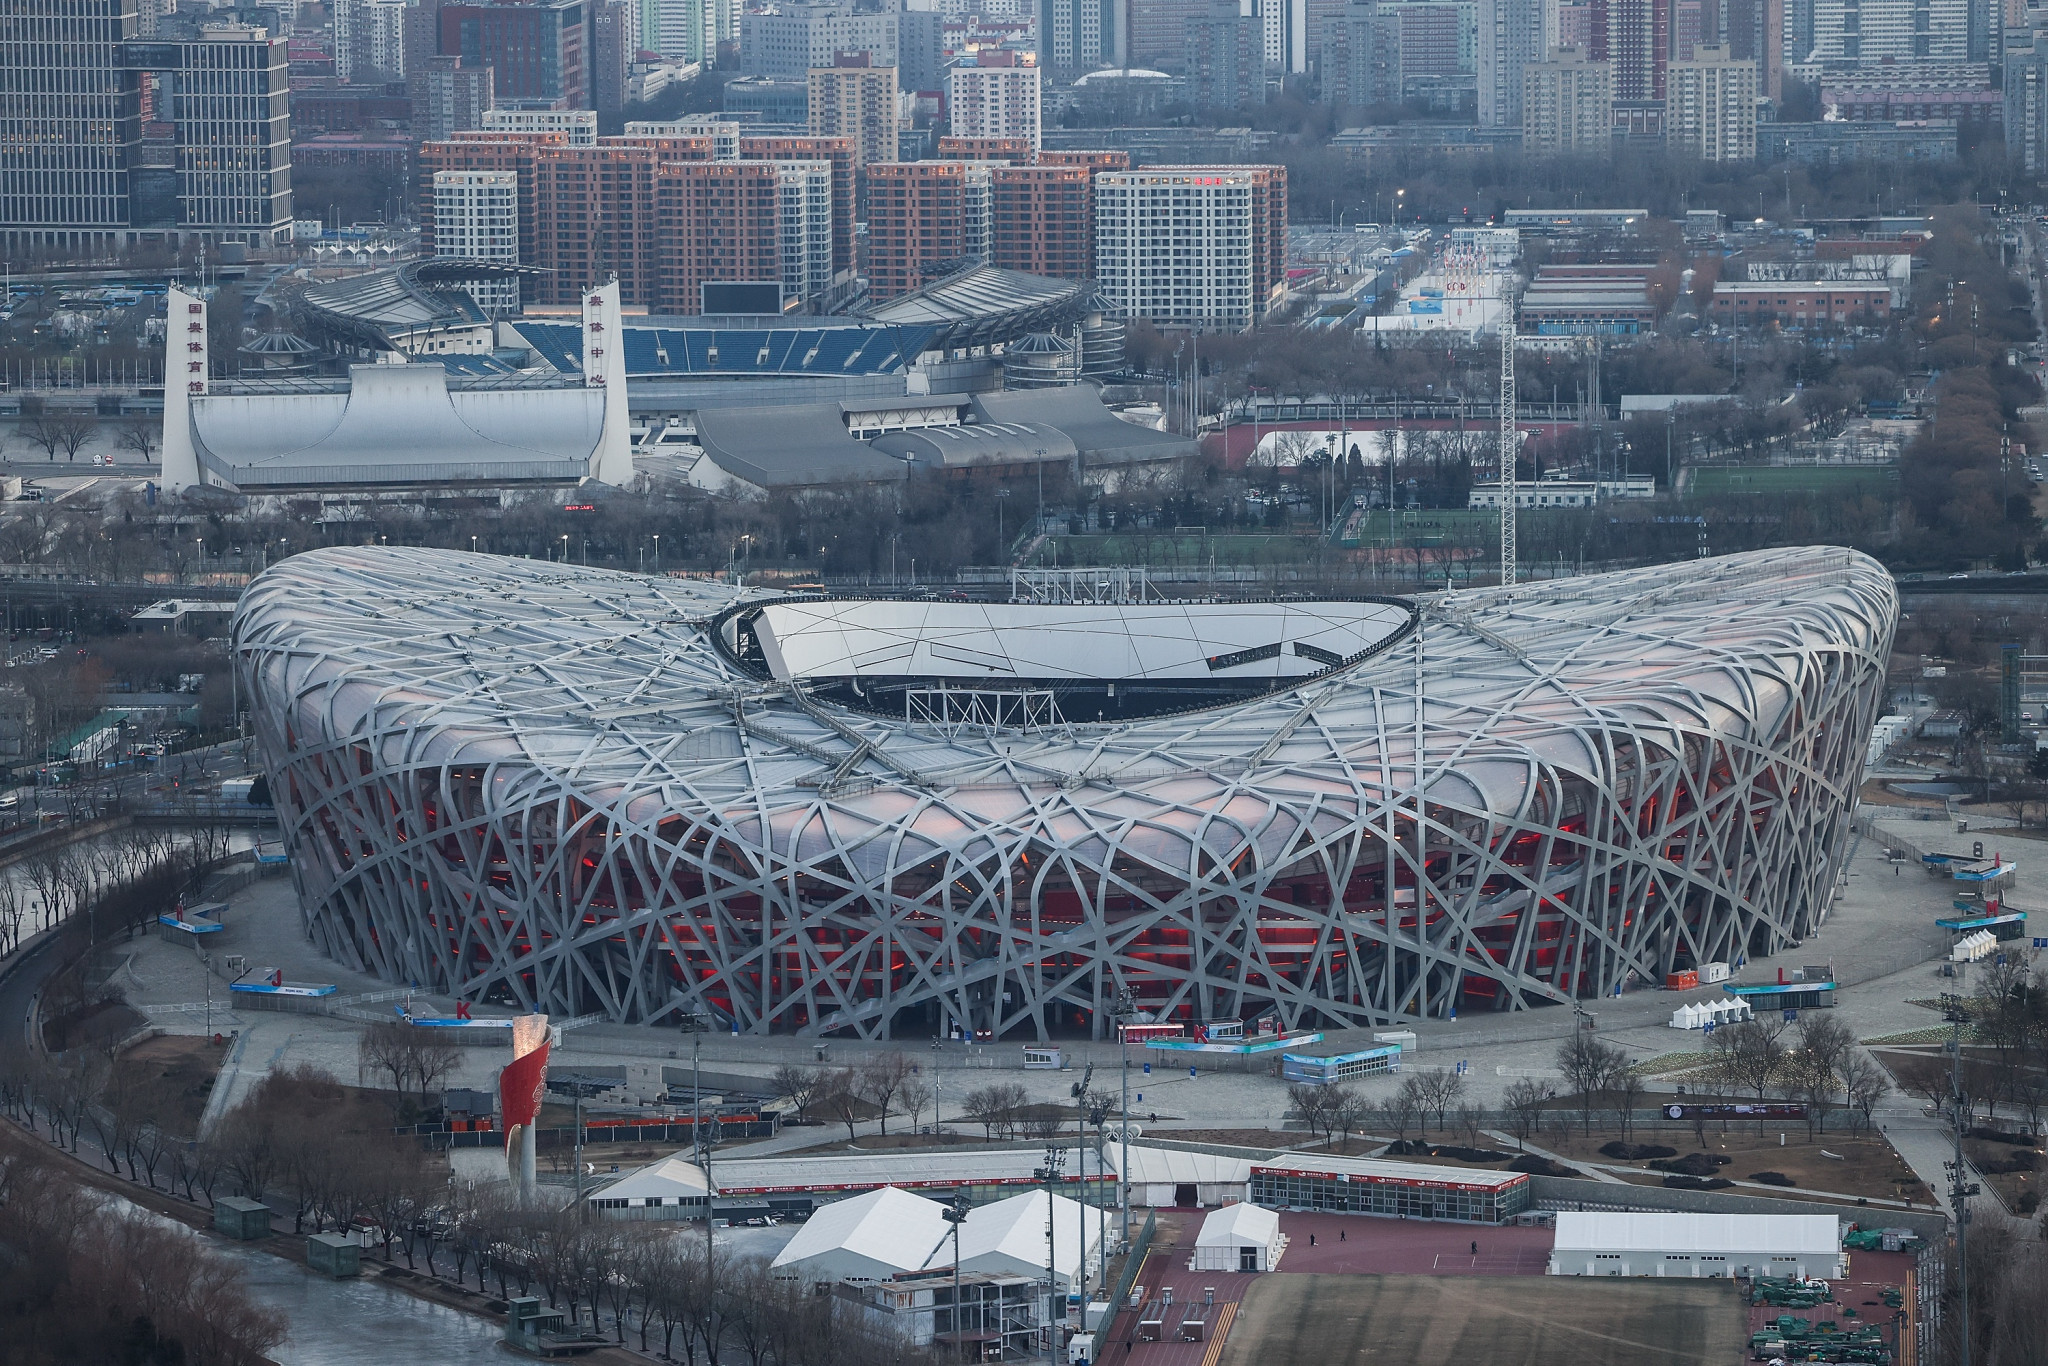 The Bird's Nest is set to stage the Opening Ceremony on February 4 ©Getty Images